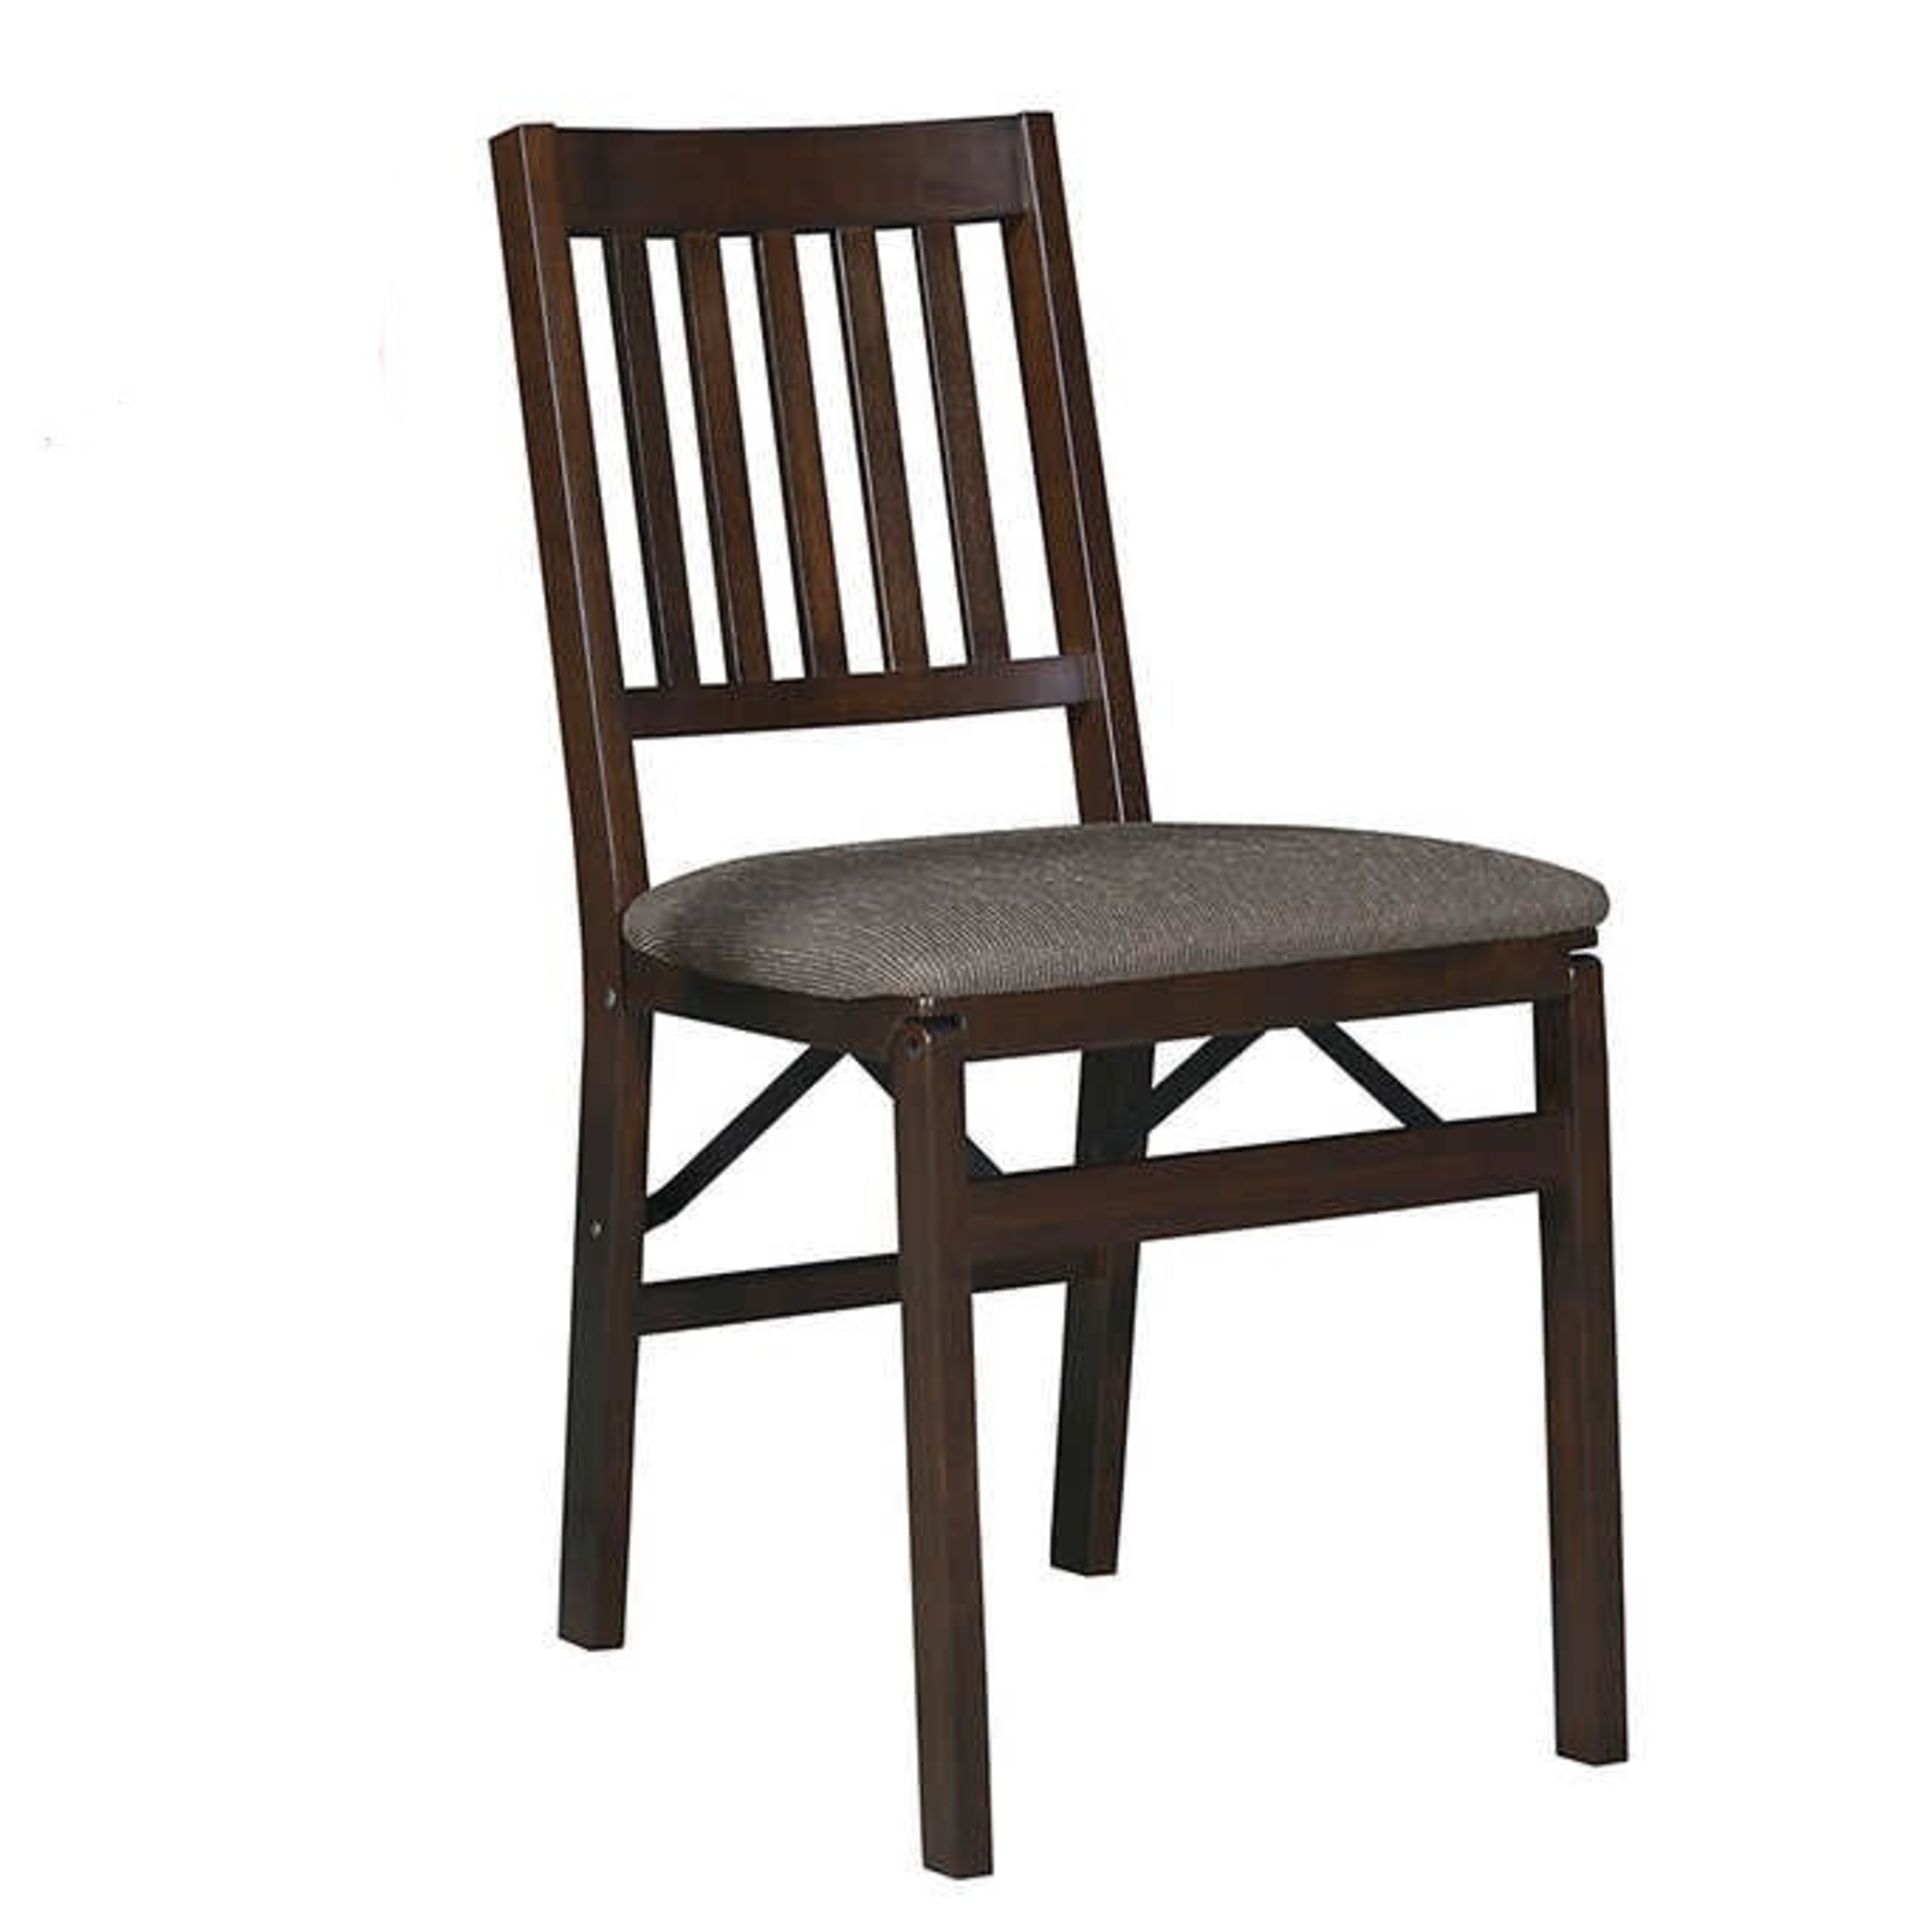 1 STAKMORE SOLID WOOD FOLDING CHAIR WITH PADDED SEAT RRP Â£29